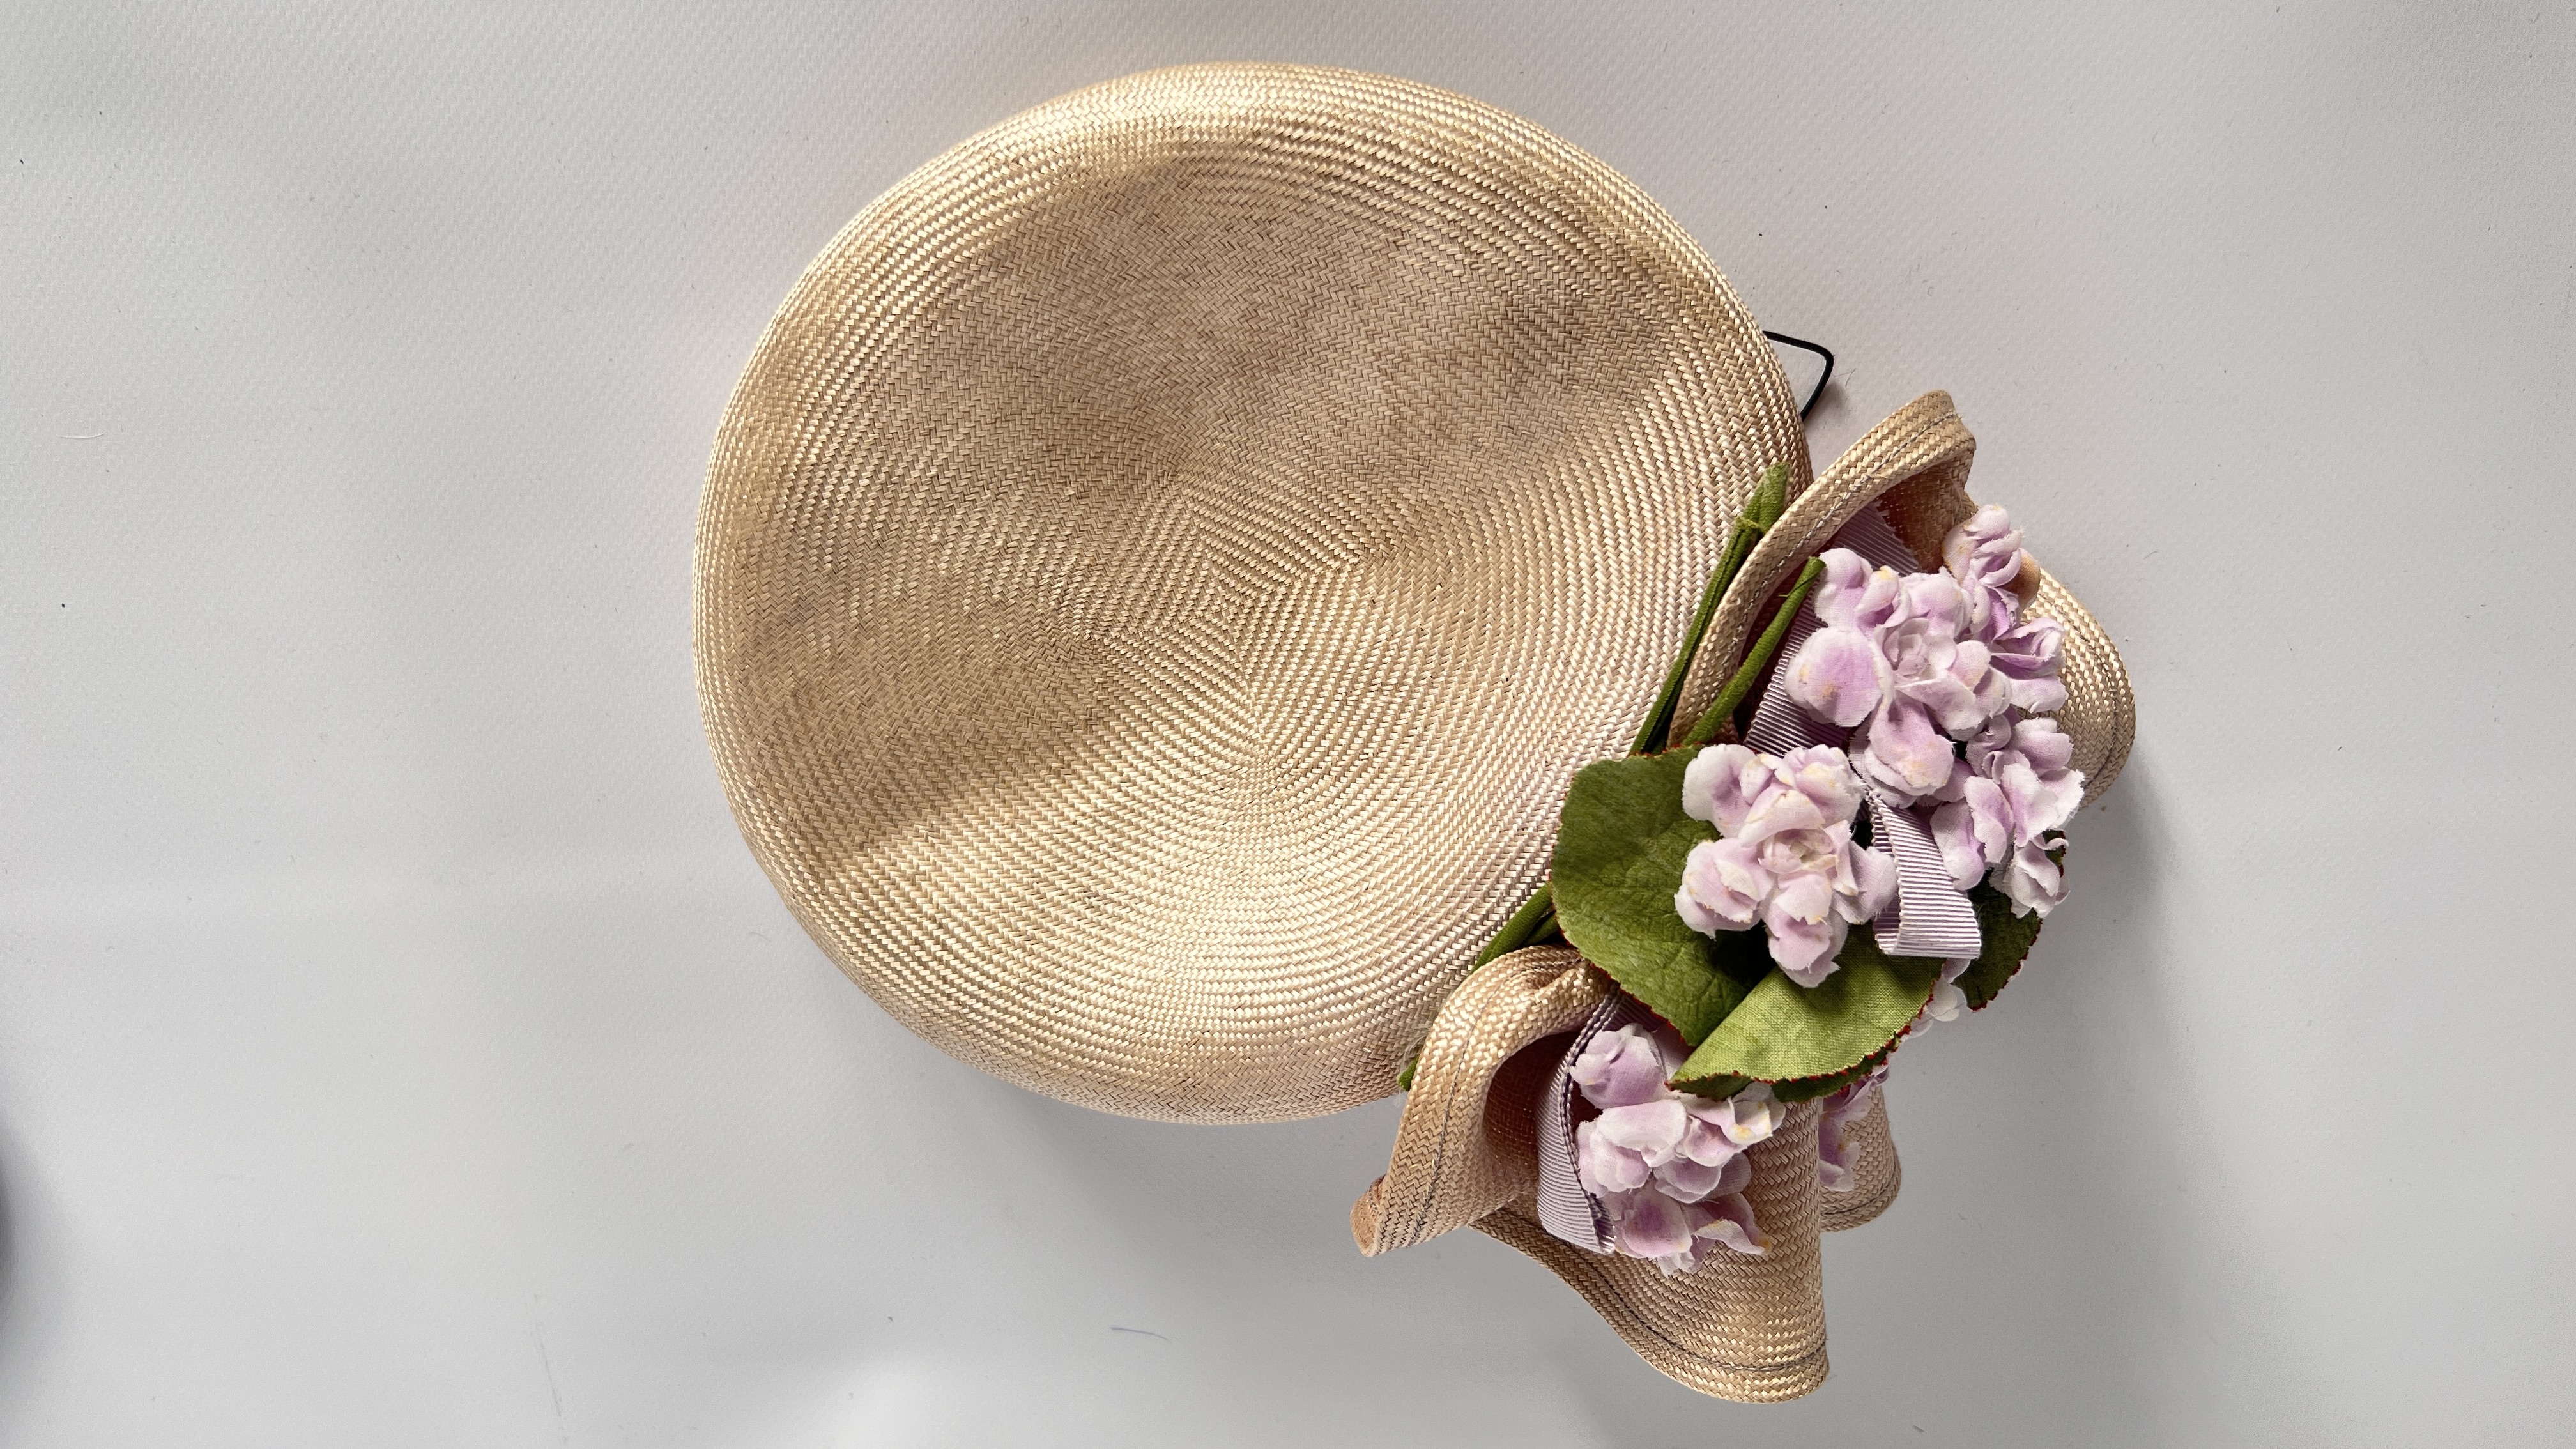 5 1940/50S HATS, 1 MULTI COLOURED FEATHER, 1LILAC/GREY STRAW (FADED) WITH FLOWERS, 1 BROWN STRAW, - Image 12 of 27